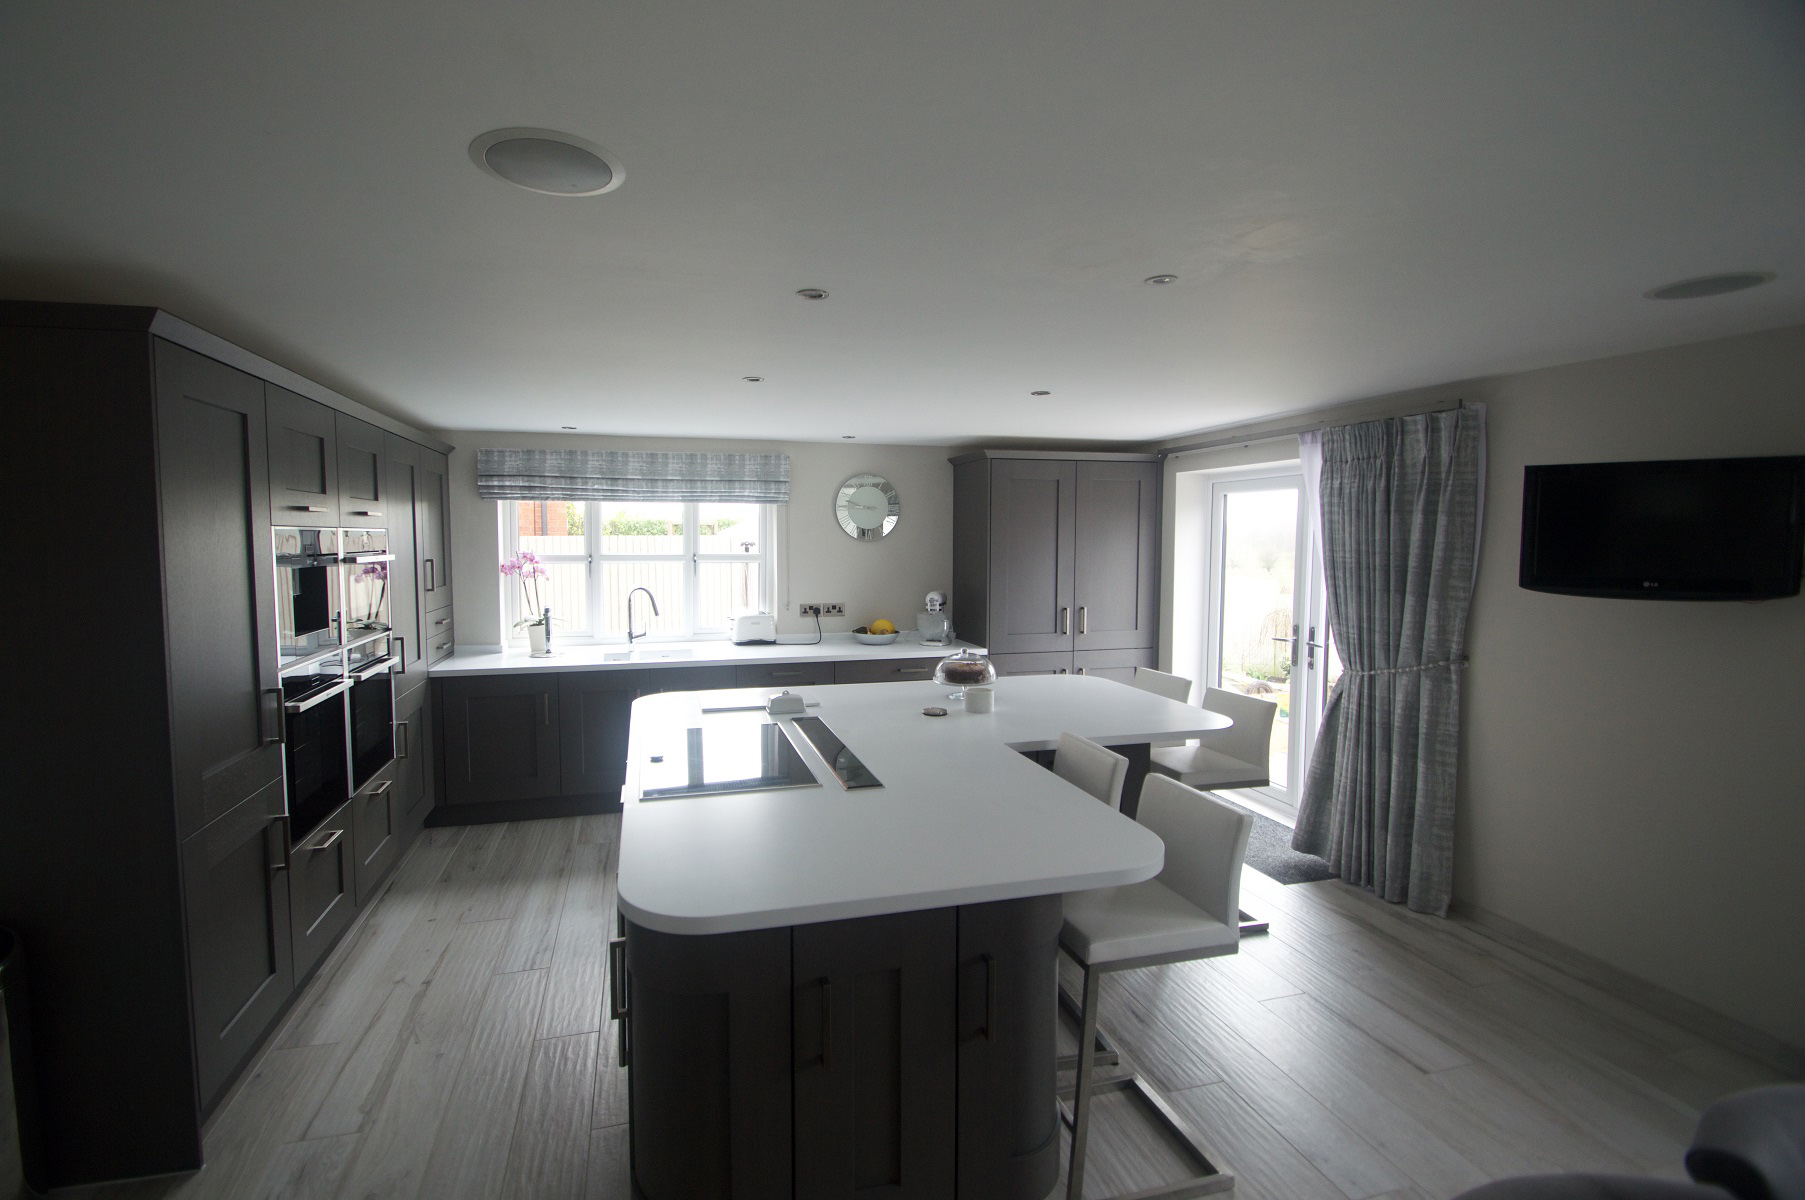 Clonmel Kitchen in Stained Anthracite Featuring Large Island Unit, Designed by Elite Kitchens of Manchester